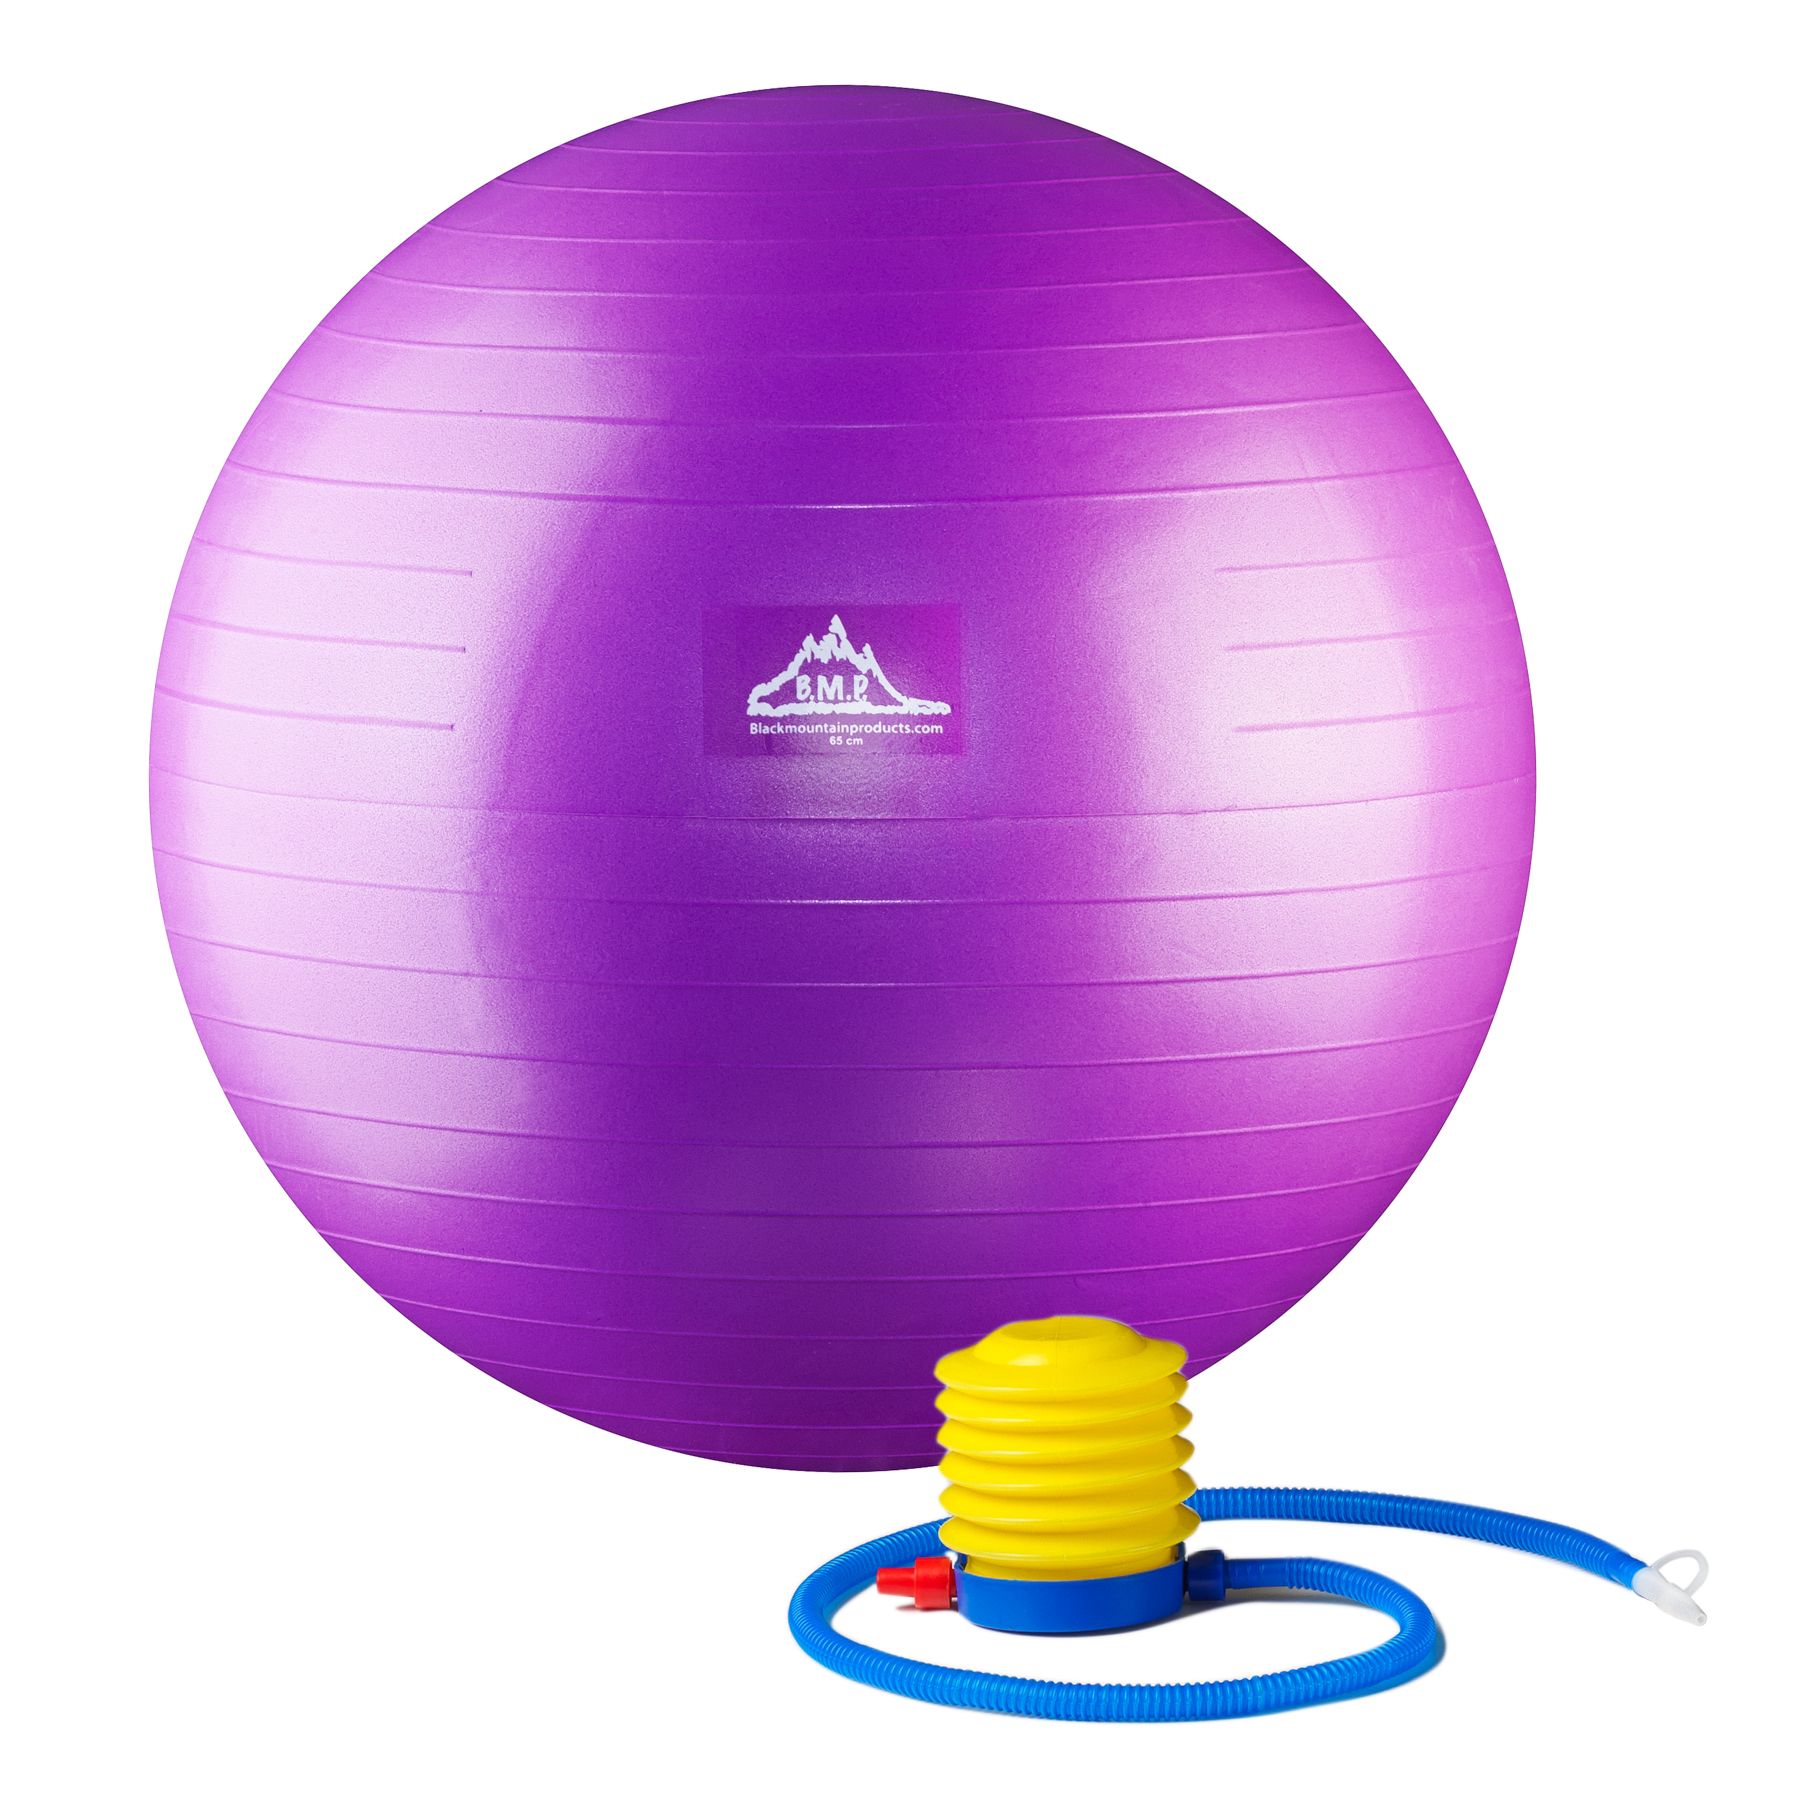 Black Mountain Products Professional Grade Stability Ball -$9.19(49% Off)